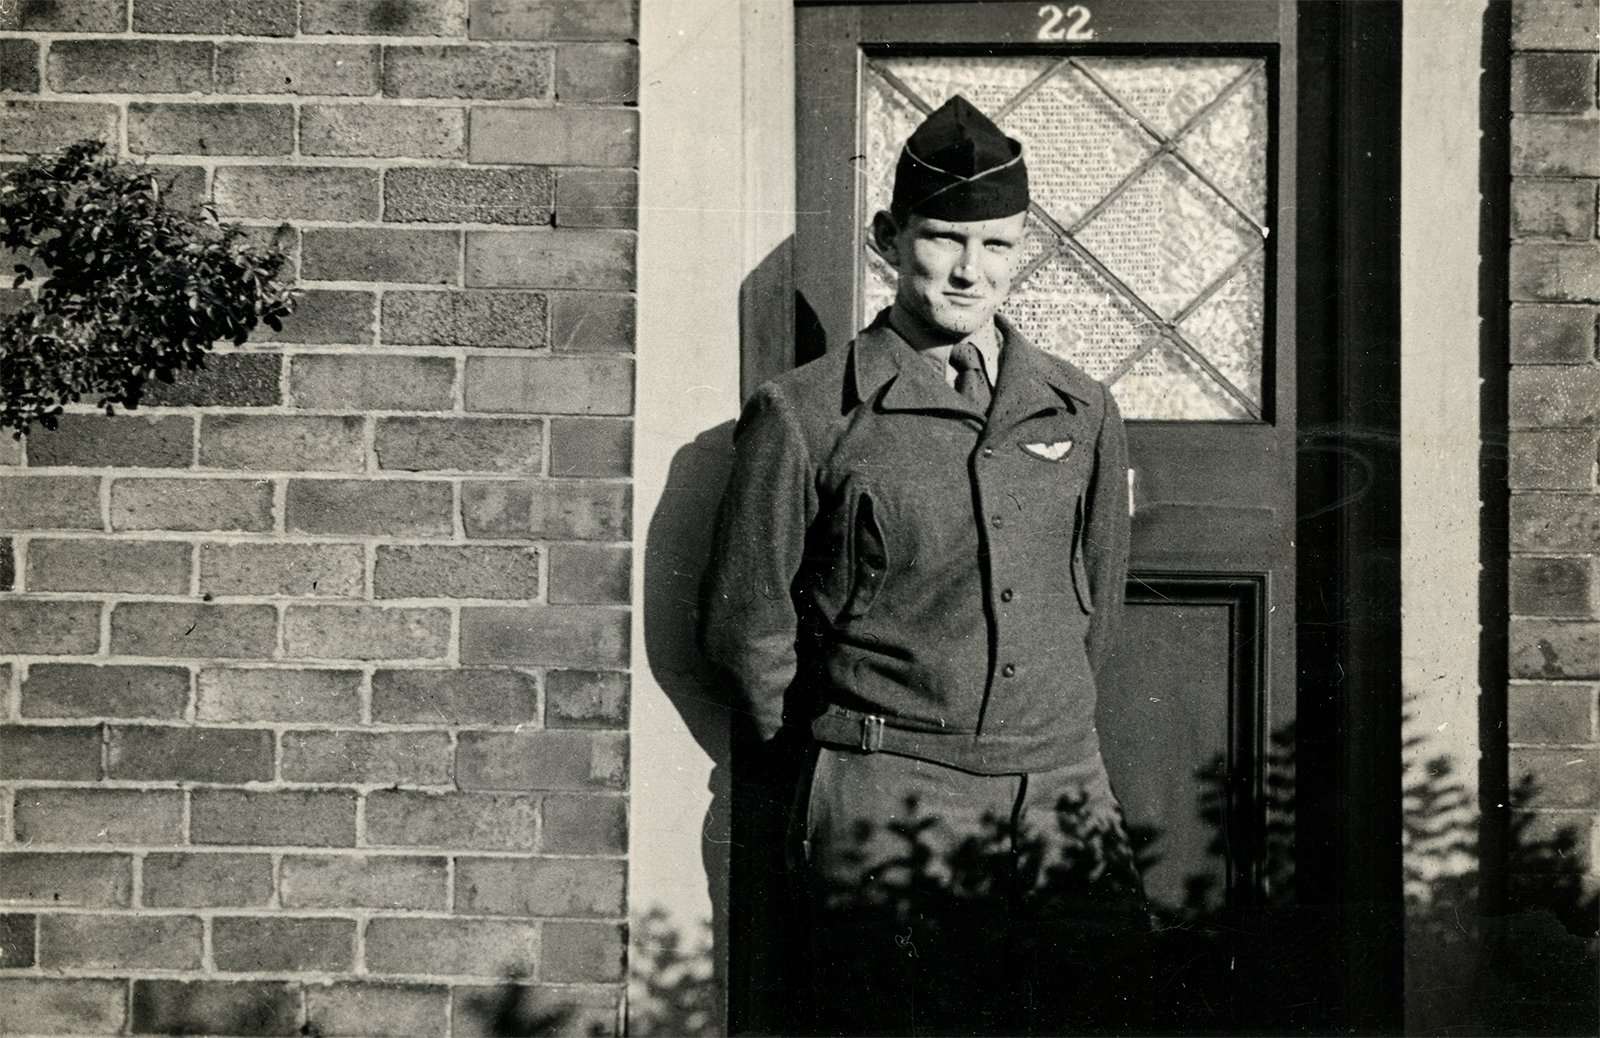 Thomas Brown (b. 1924) (Chris Murray’s maternal uncle) in U.S. Army uniform, c. 1946. The photo is probably taken in London, where he was stationed after VE Day.